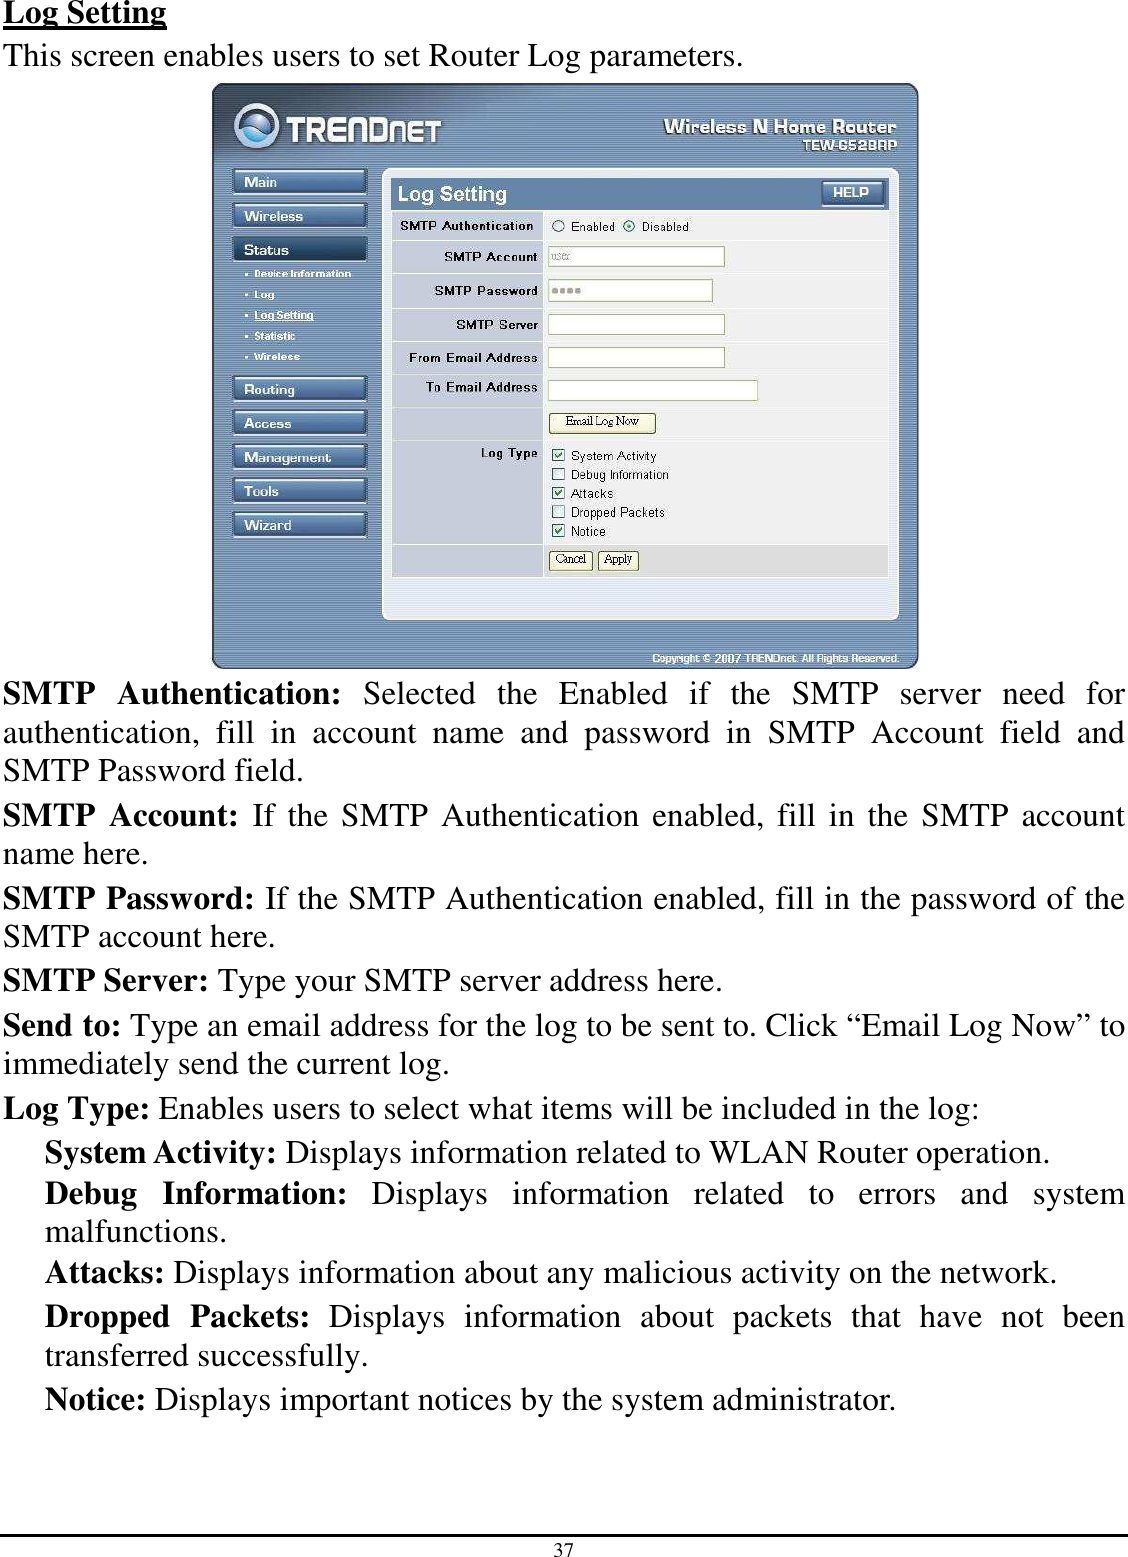 37 Log Setting This screen enables users to set Router Log parameters.  SMTP  Authentication:  Selected  the  Enabled  if  the  SMTP  server  need  for authentication,  fill  in  account  name  and  password  in  SMTP  Account  field  and SMTP Password field. SMTP  Account:  If the SMTP Authentication enabled, fill in the SMTP account name here. SMTP Password: If the SMTP Authentication enabled, fill in the password of the SMTP account here. SMTP Server: Type your SMTP server address here. Send to: Type an email address for the log to be sent to. Click “Email Log Now” to immediately send the current log. Log Type: Enables users to select what items will be included in the log: System Activity: Displays information related to WLAN Router operation. Debug  Information:  Displays  information  related  to  errors  and  system malfunctions. Attacks: Displays information about any malicious activity on the network. Dropped  Packets:  Displays  information  about  packets  that  have  not  been transferred successfully. Notice: Displays important notices by the system administrator. 